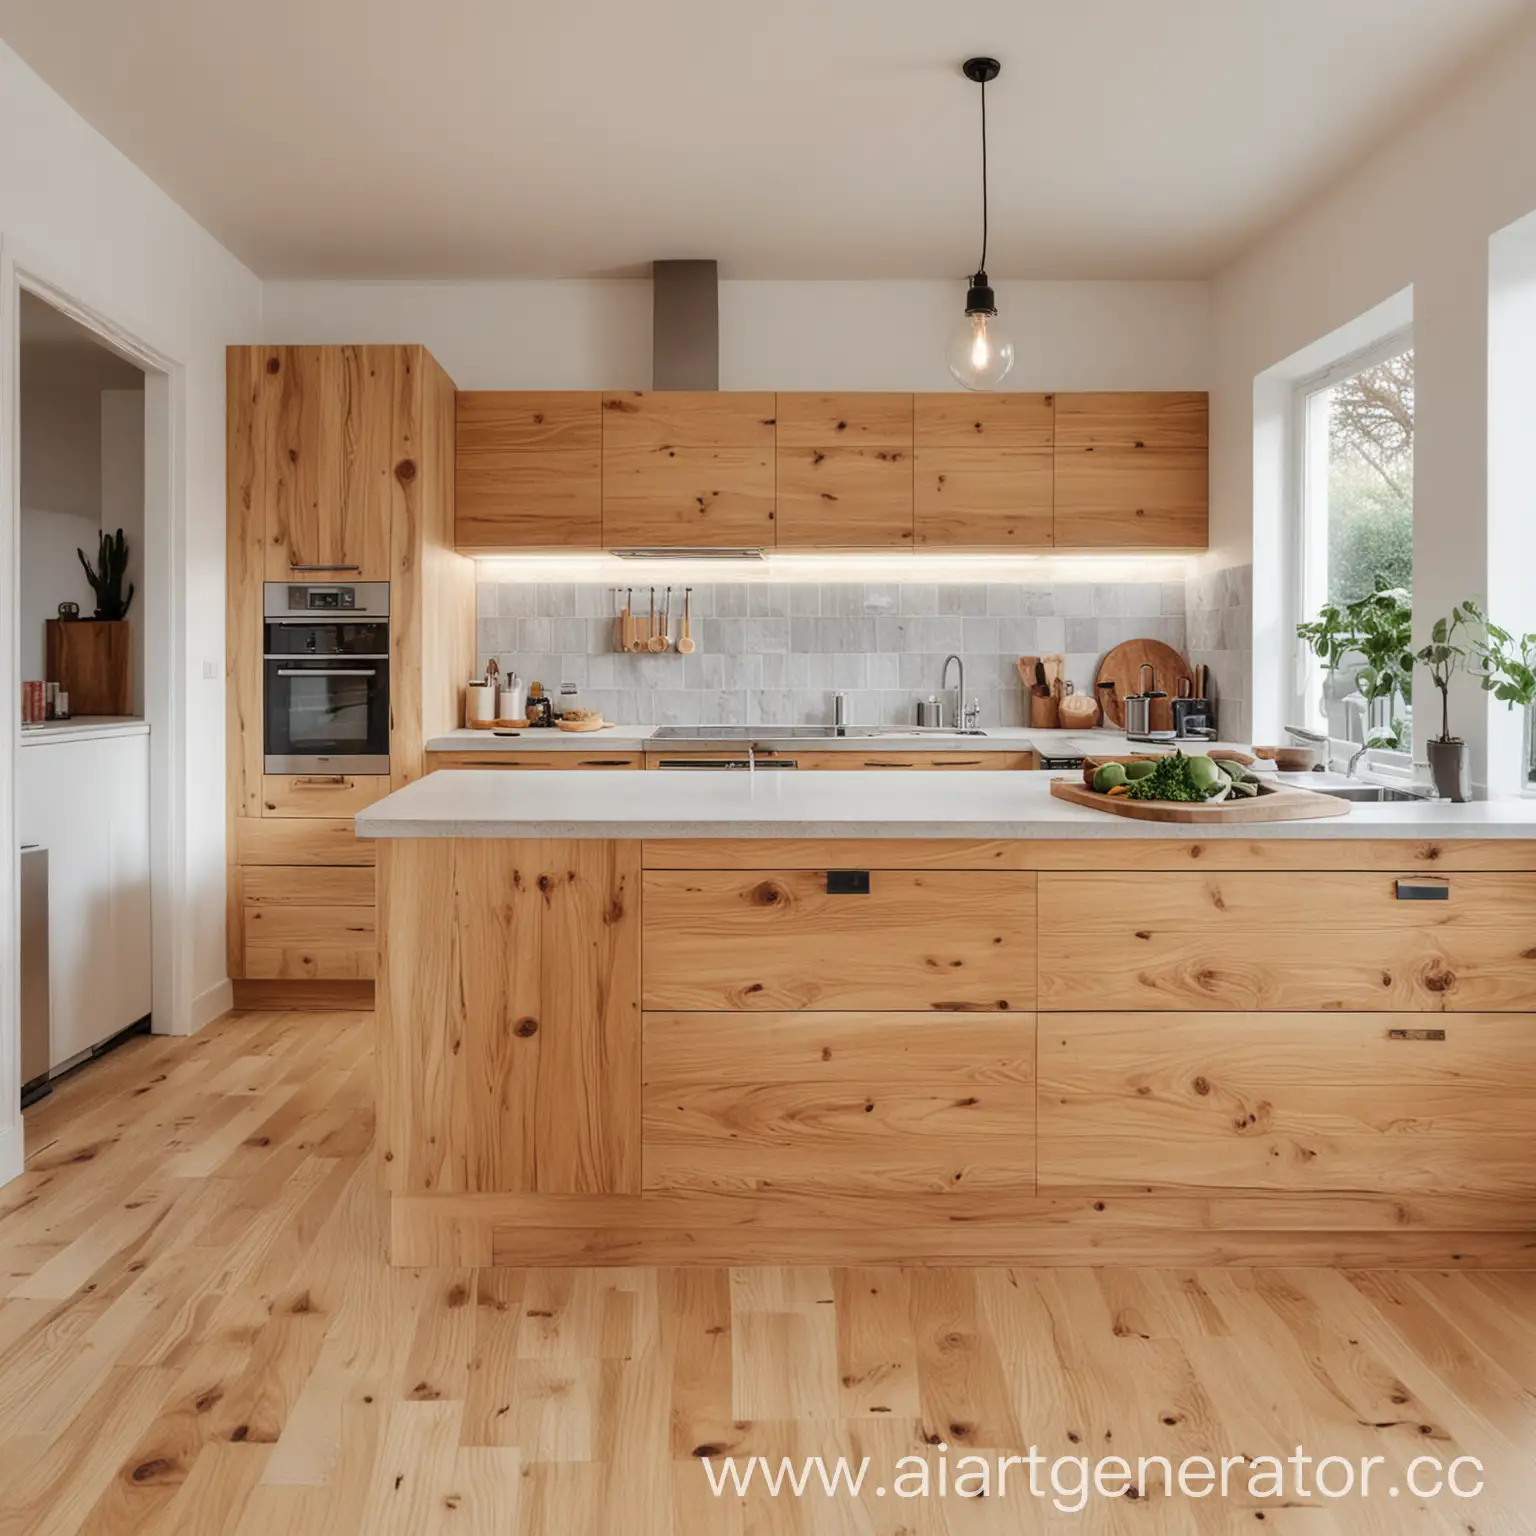 Bright-Kitchen-Scene-with-Wooden-Stove